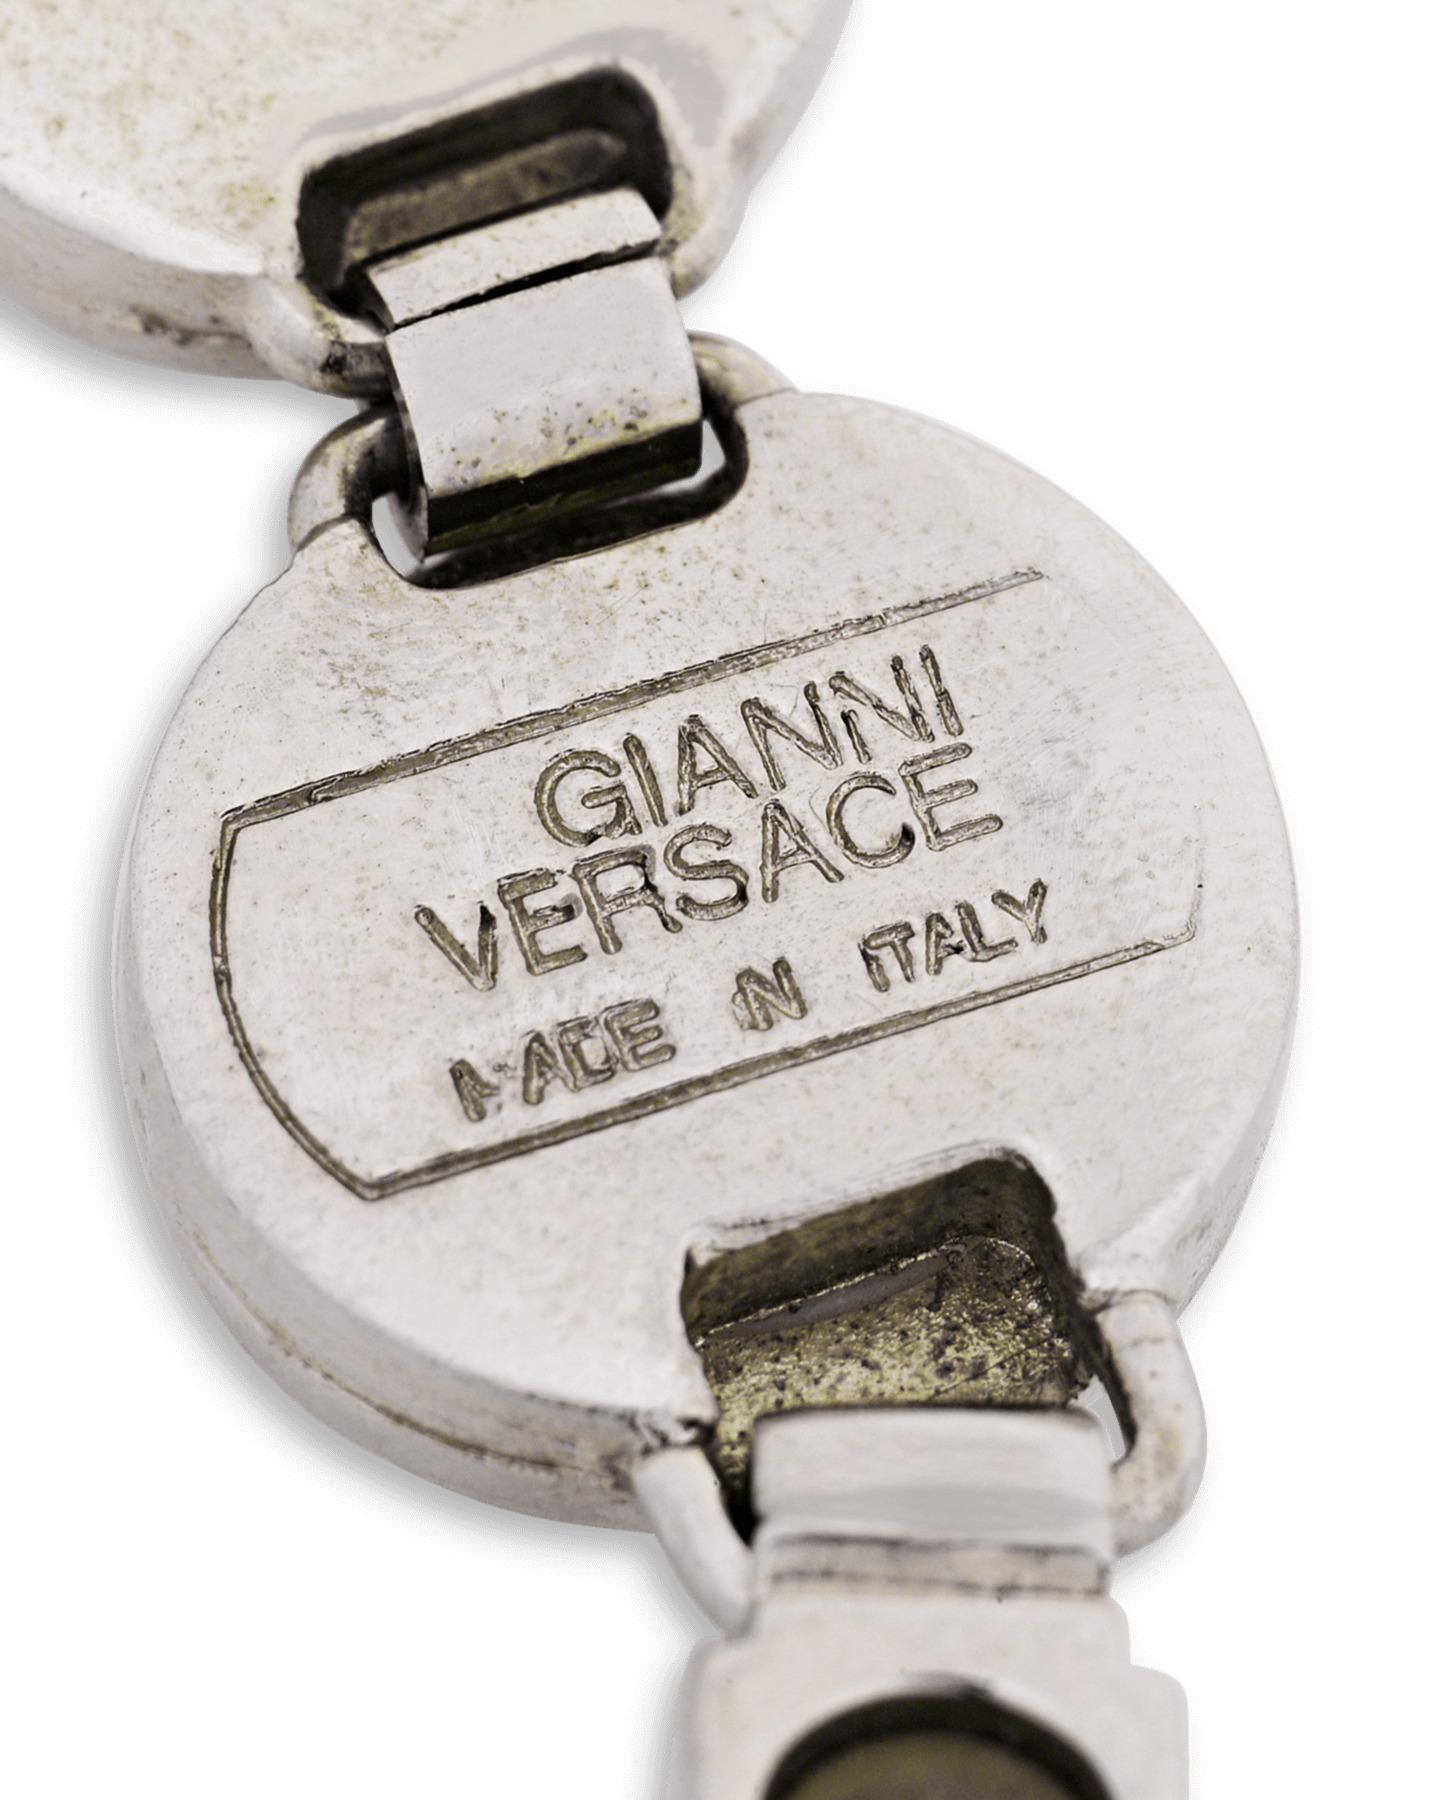 Once owned by the legendary pop star Prince, this exceptional silver colored bracelet by Versace exemplifies both the creative genius of the Italian firm and the unique style of this pop icon. The impressive design incorporates seven medallions that